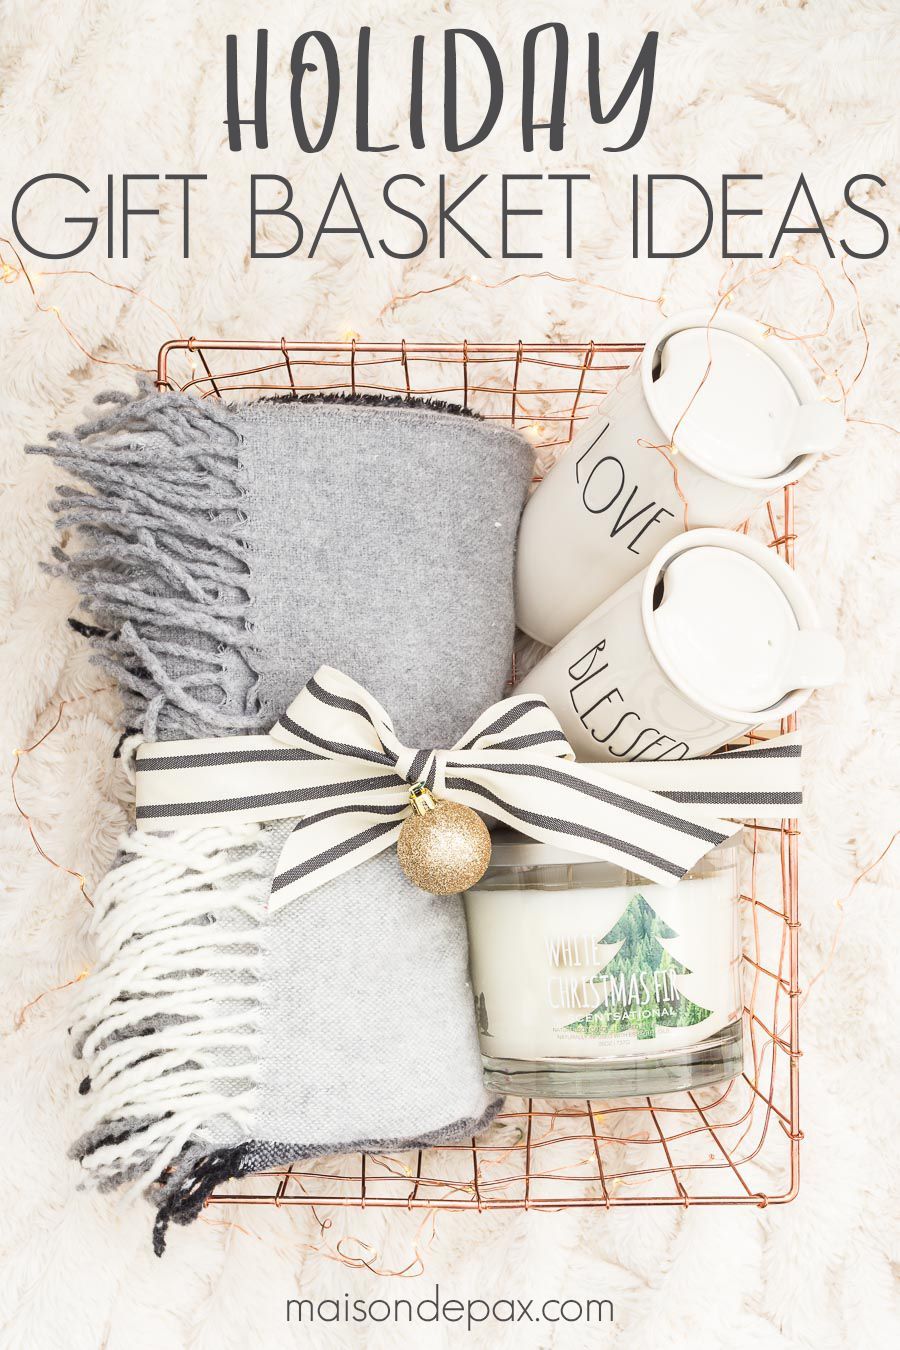 Easy Gift Basket Ideas for the Holidays -   20 crafts gifts love ideas